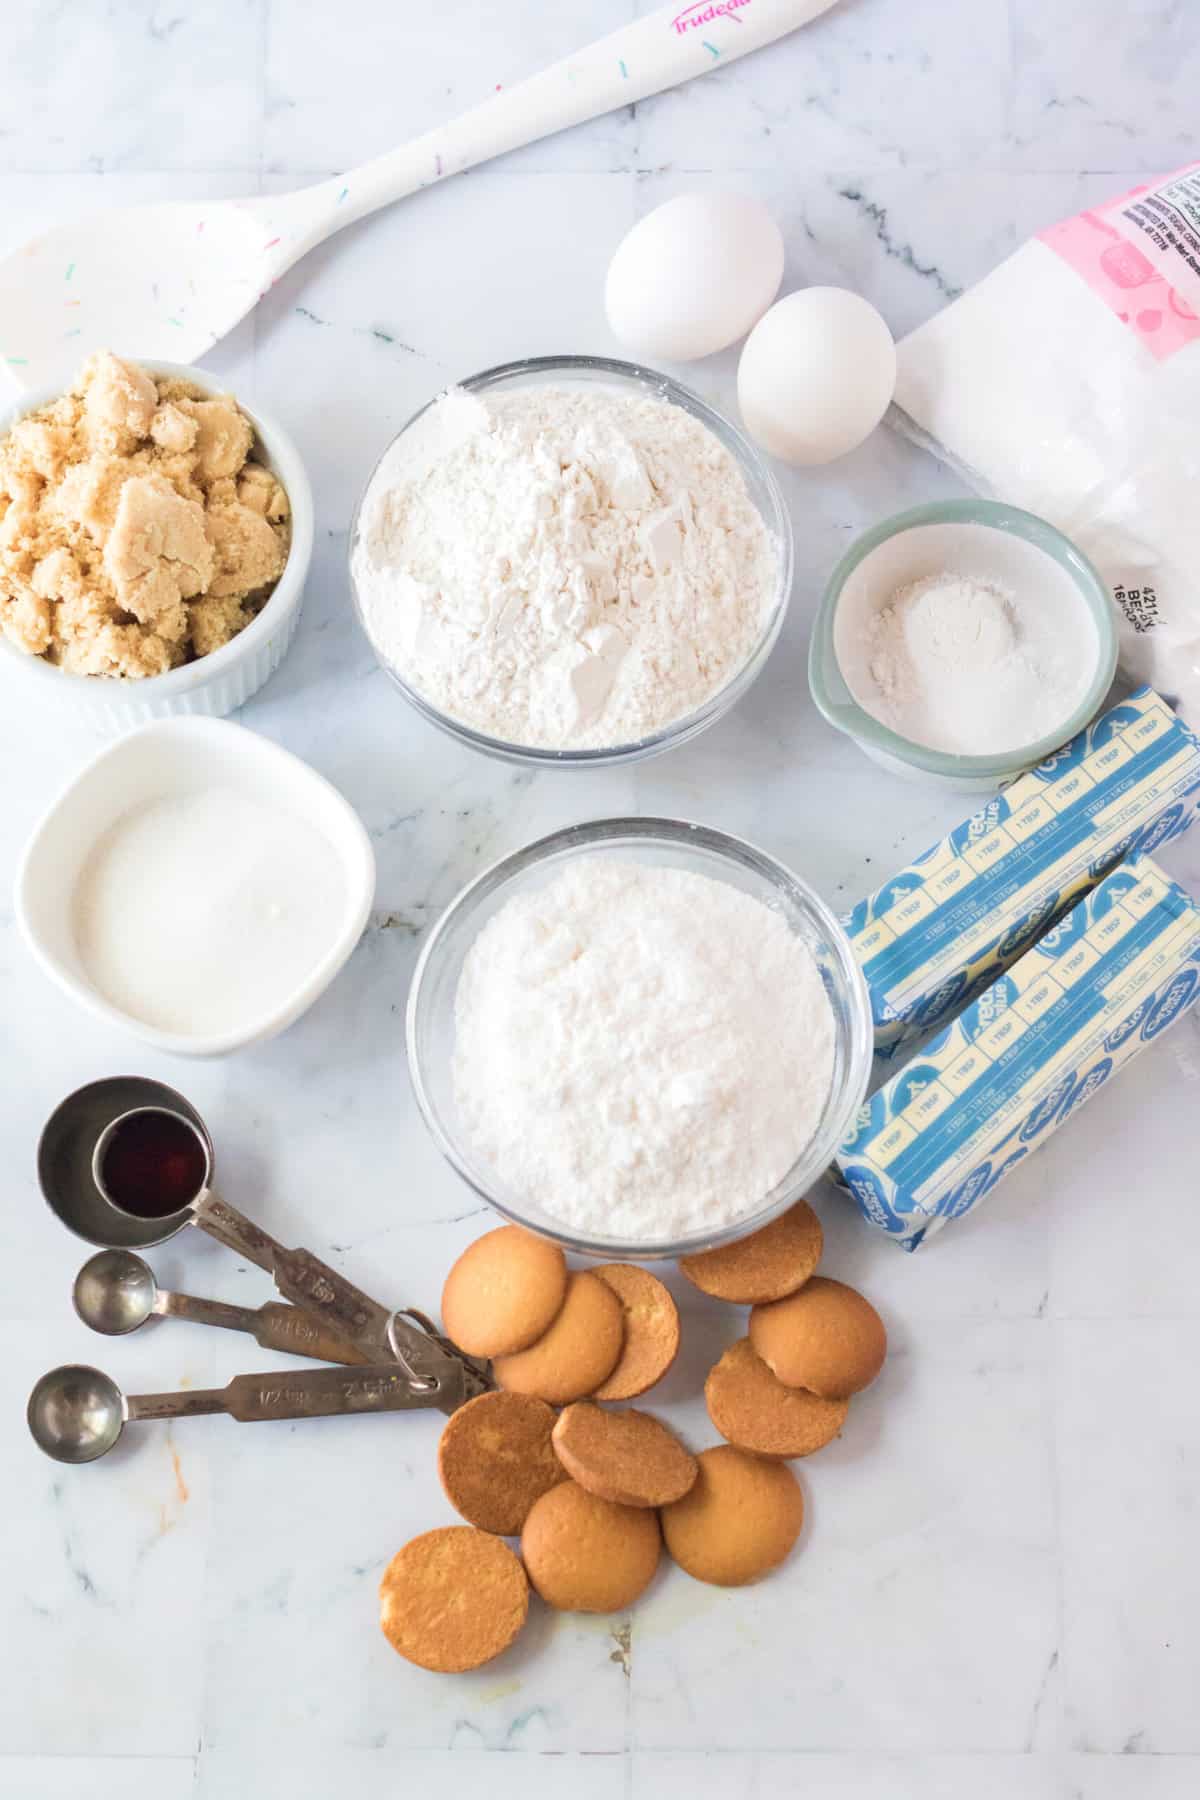 The ingredients for banana pudding cookies are spread out on a white countertop.